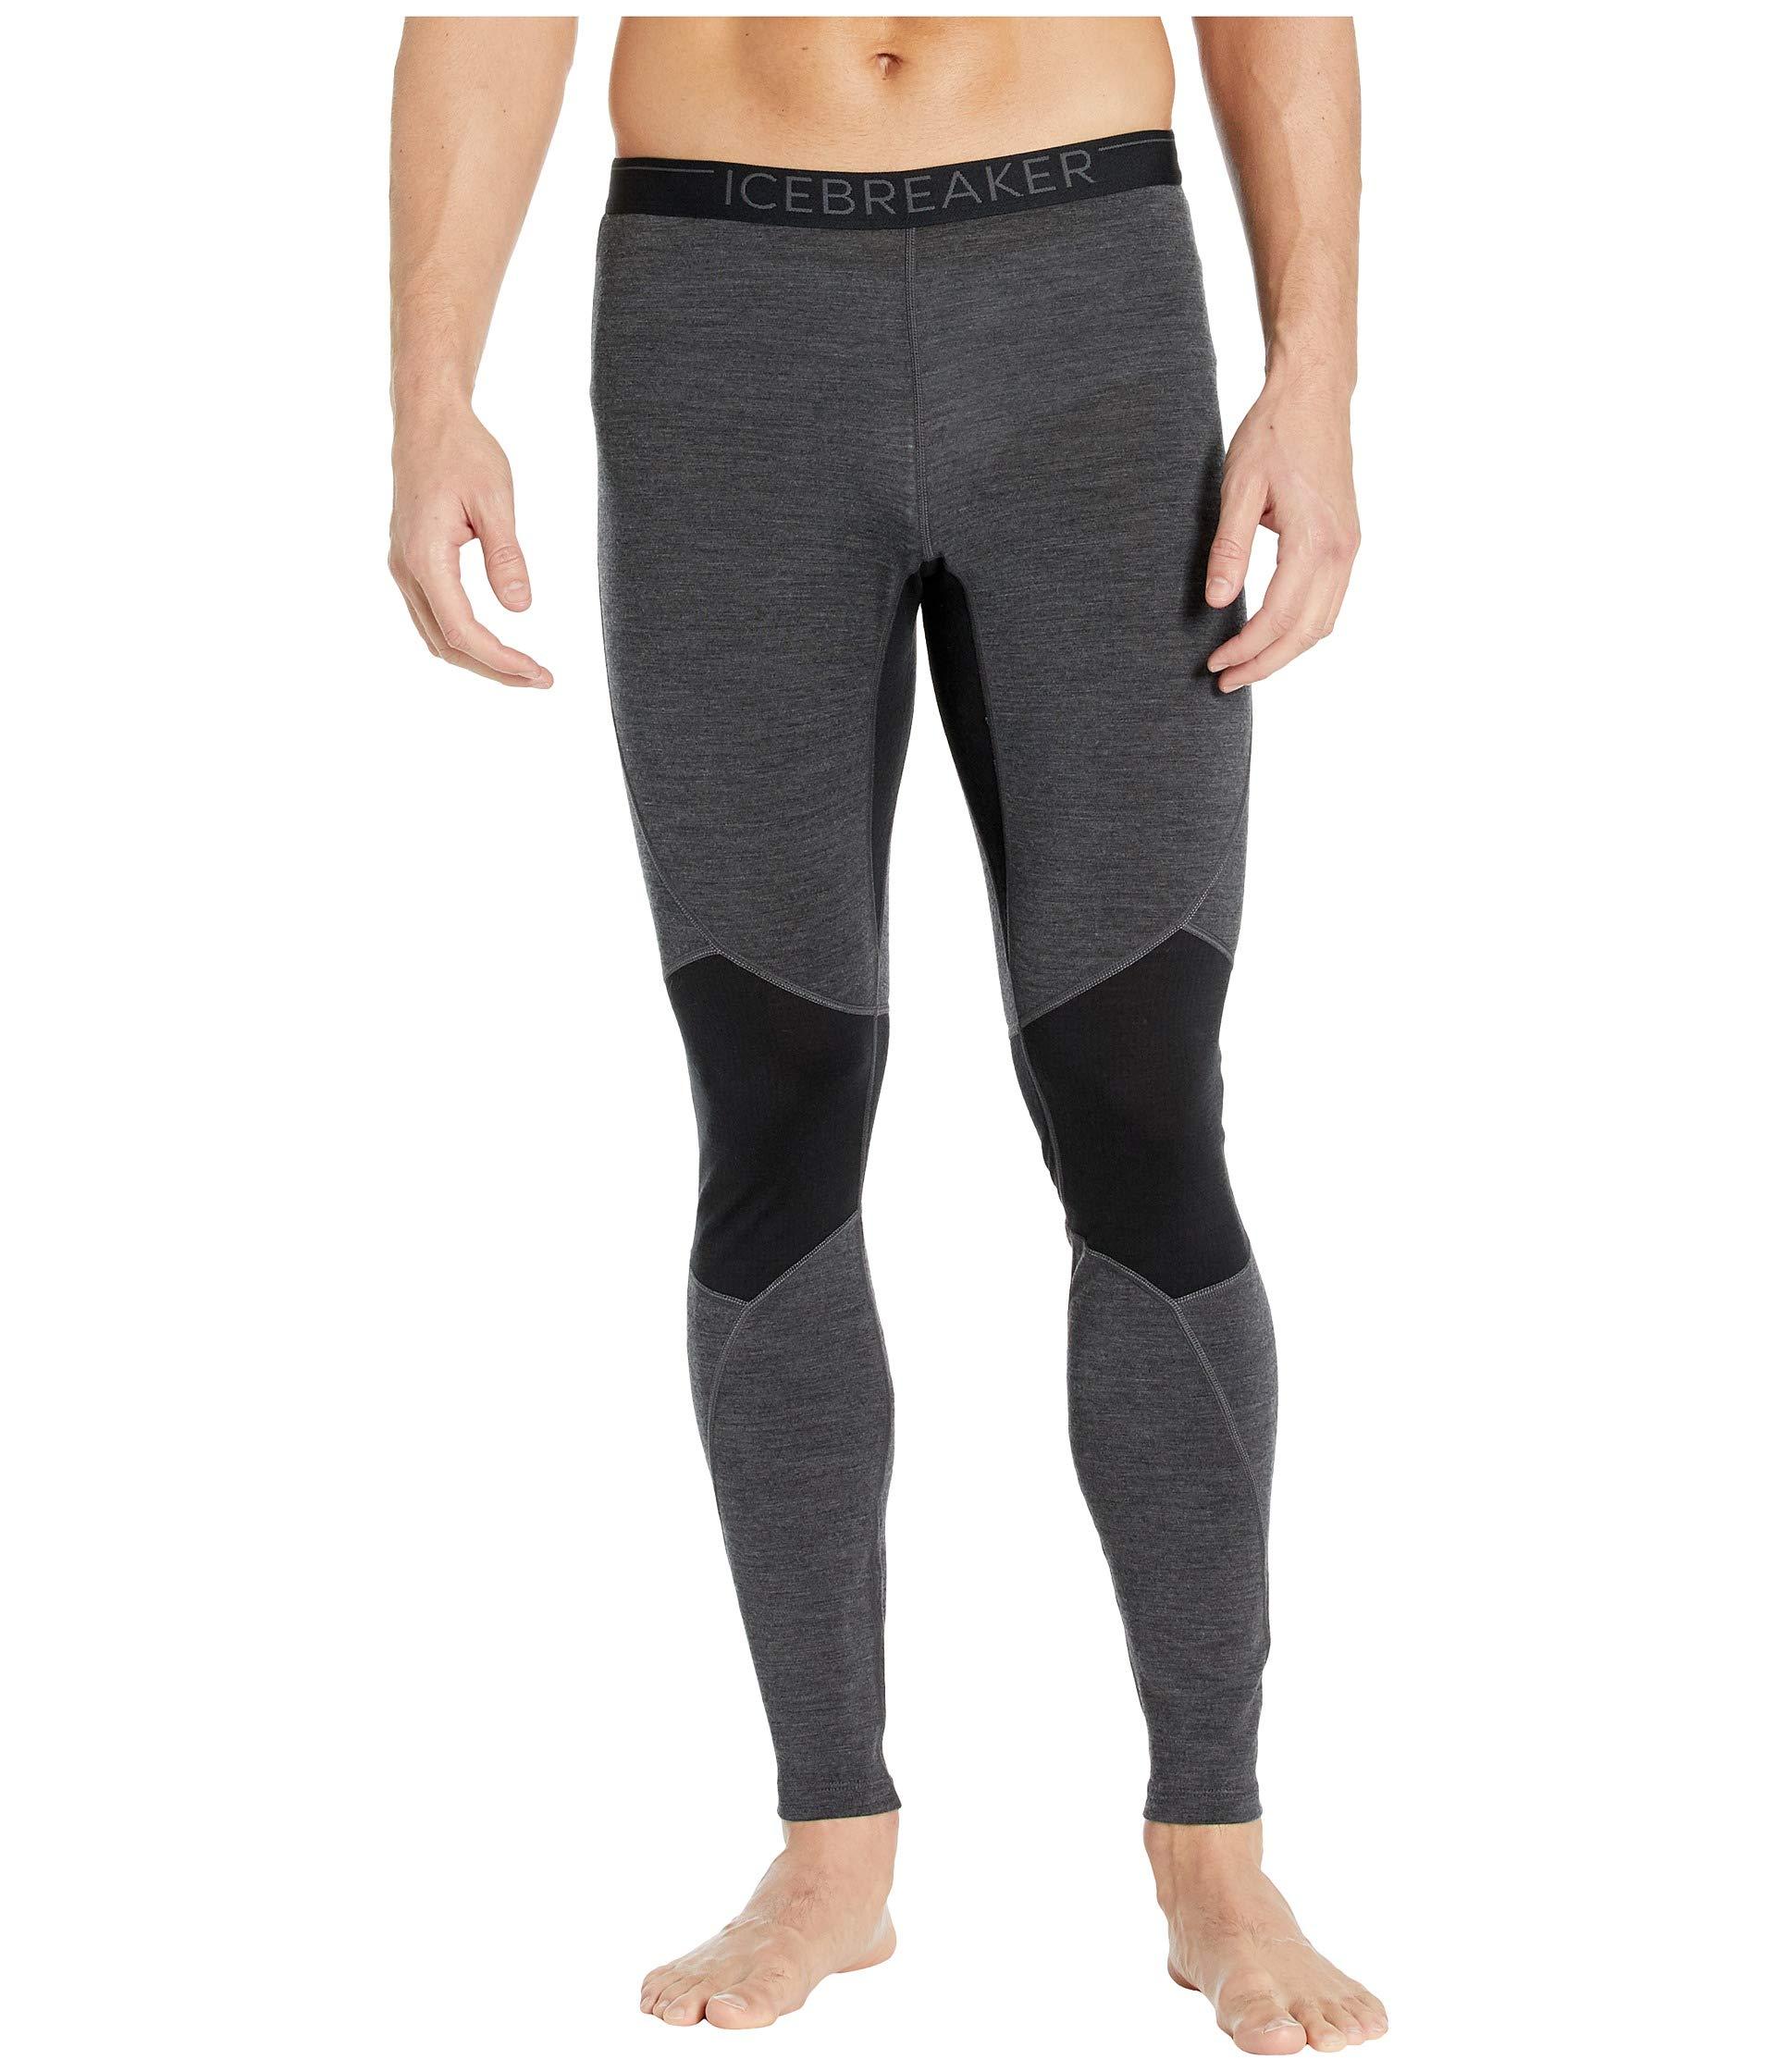 Wool Winter Leggings For Women  International Society of Precision  Agriculture